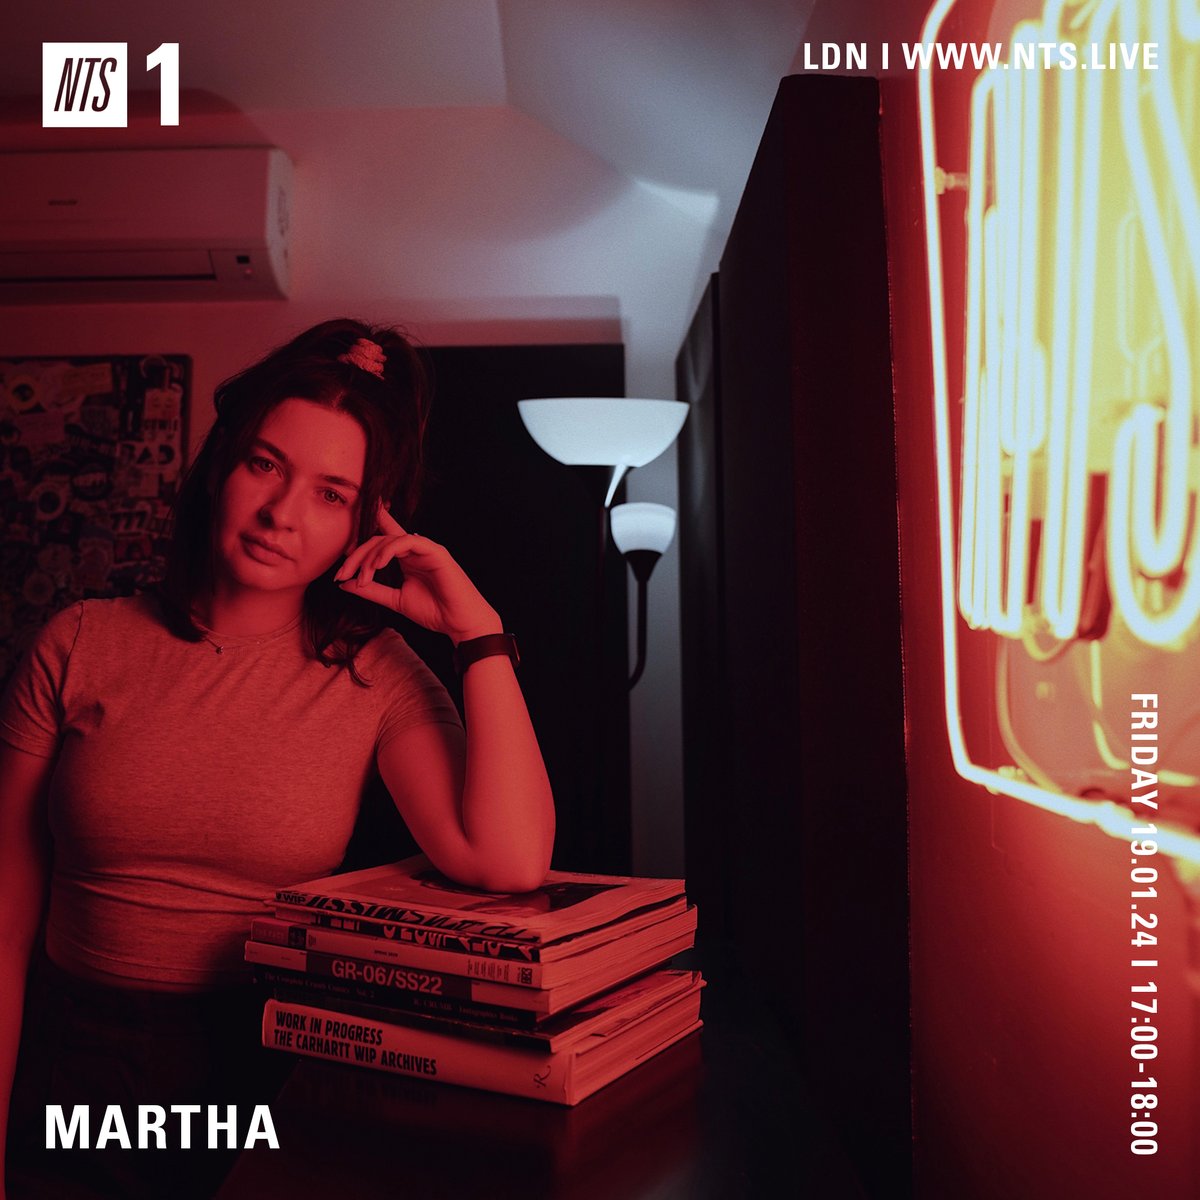 .@MARTHAradio live from home today rounding up recent electronic music favourites Tune in: nts.live/1